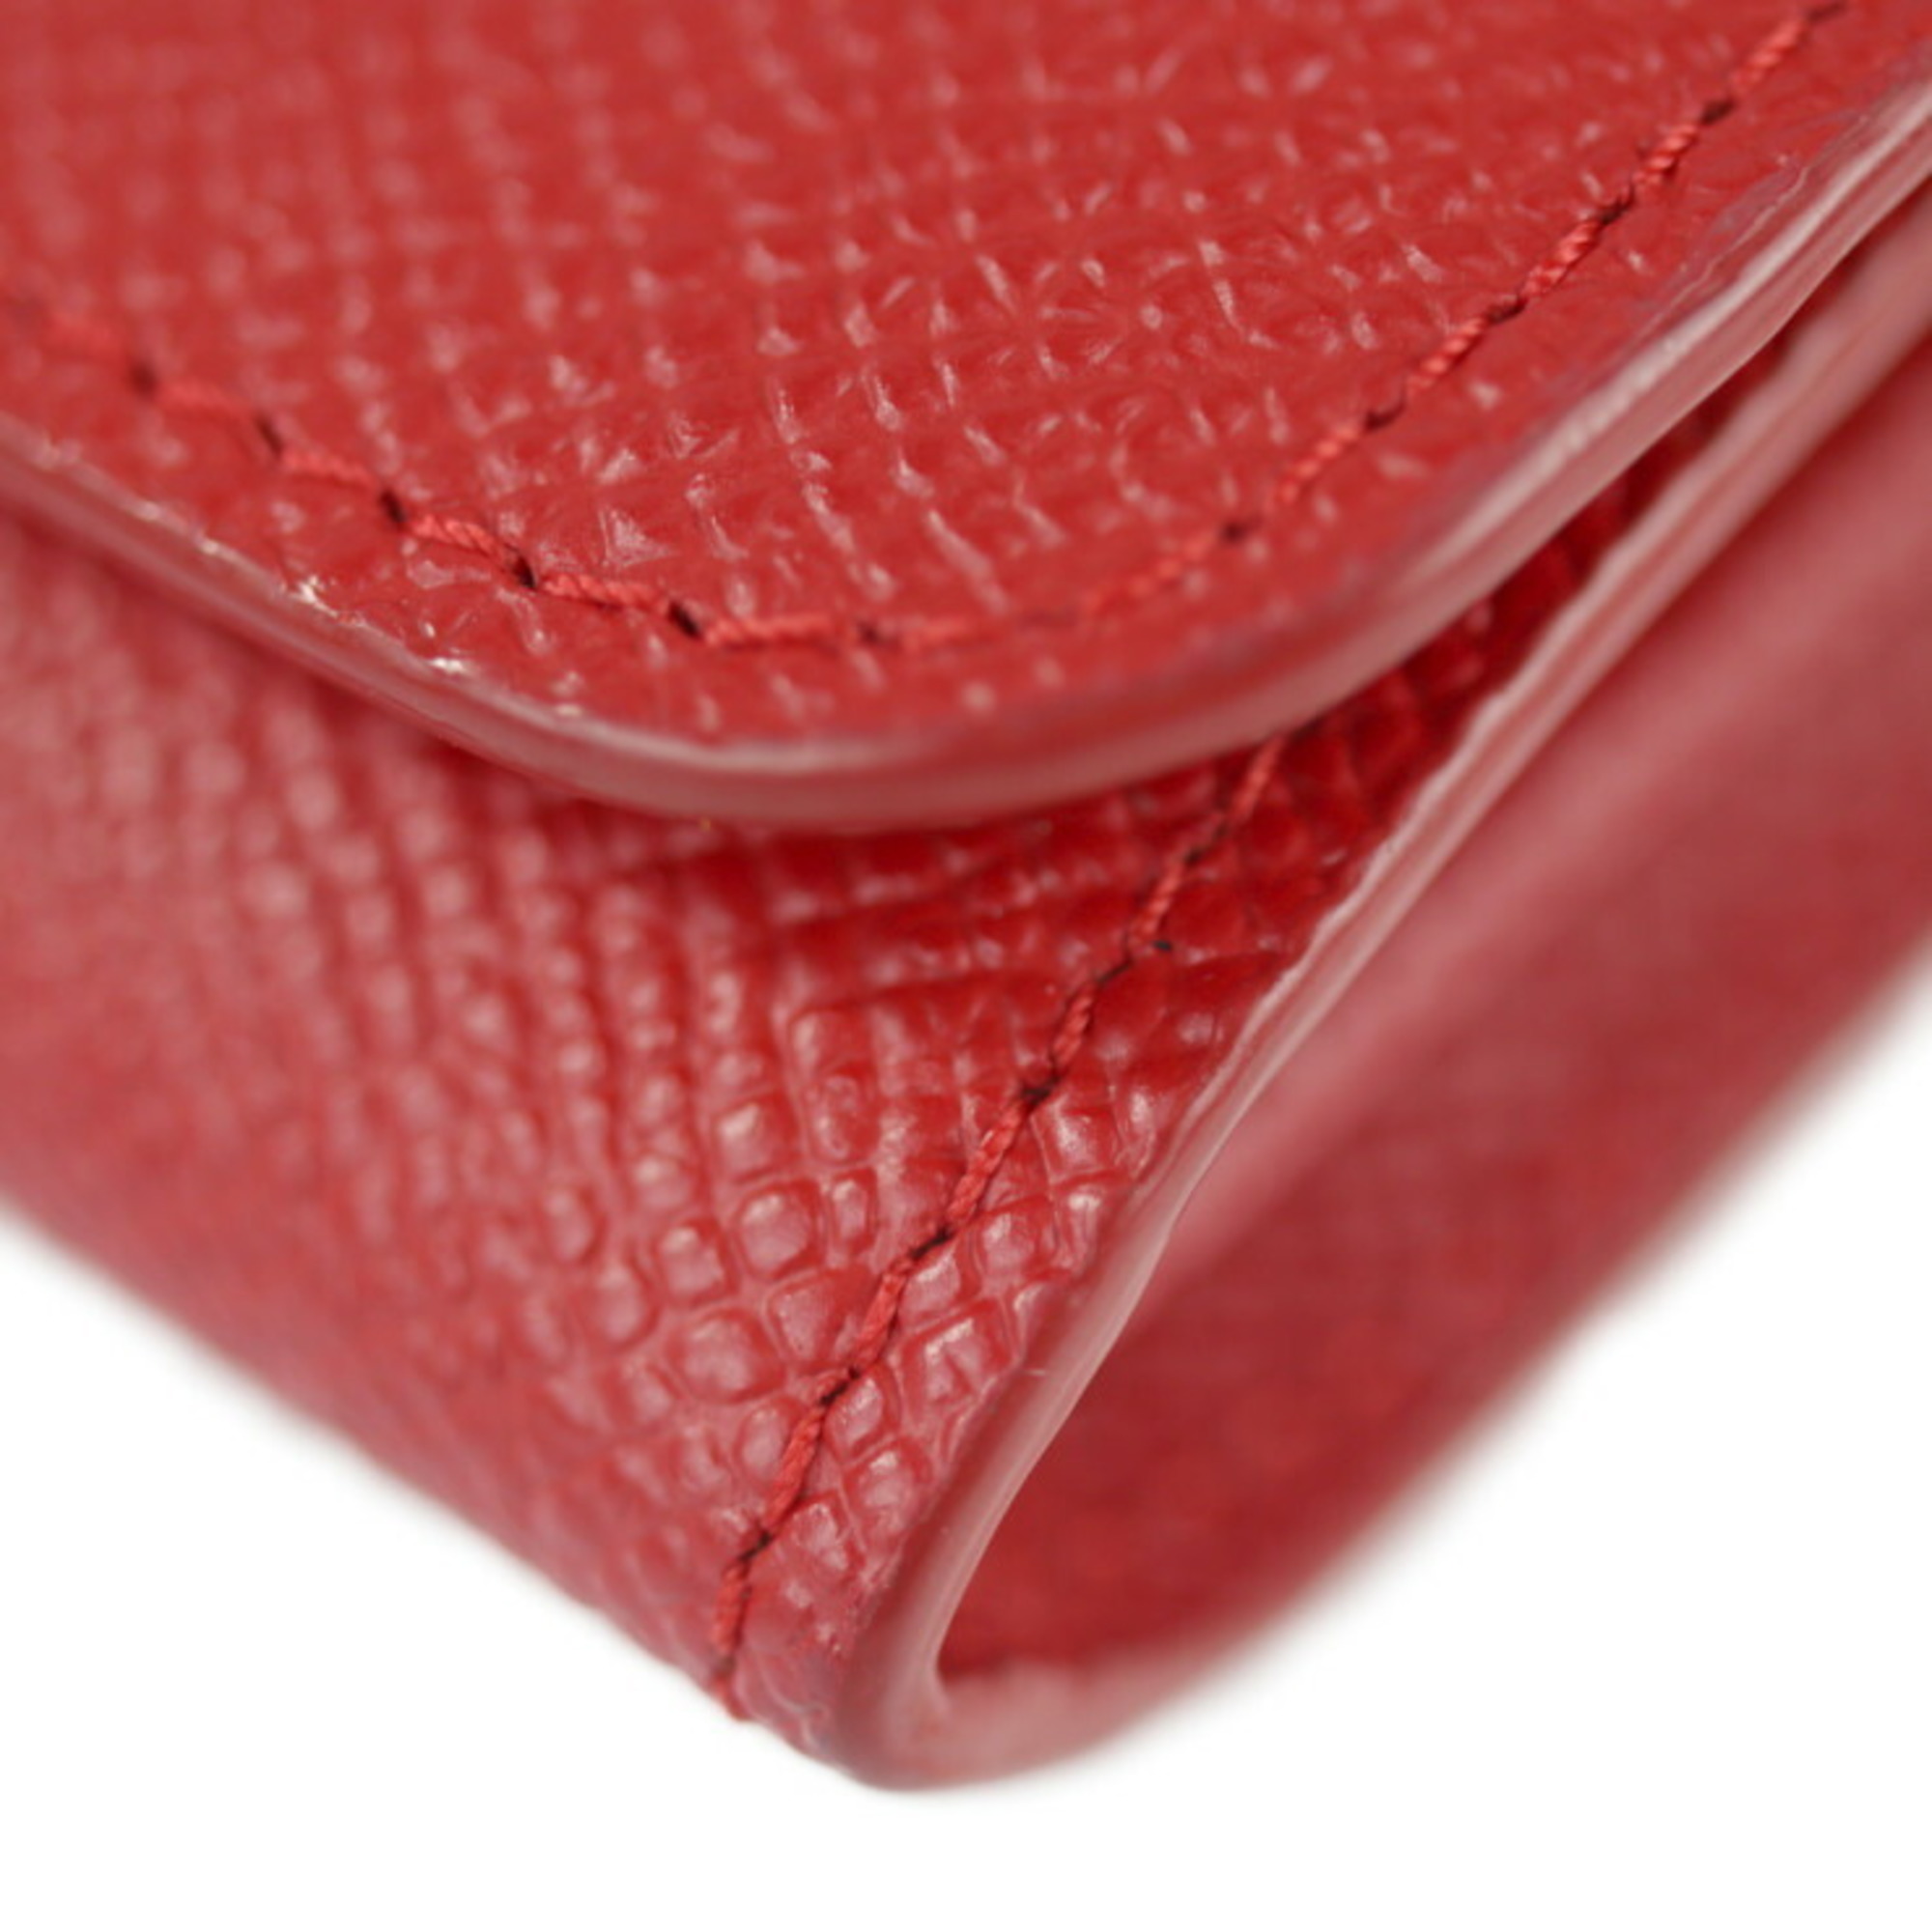 TOD'S Tod's Flap Continental Wallet Bifold Leather Red Series Long